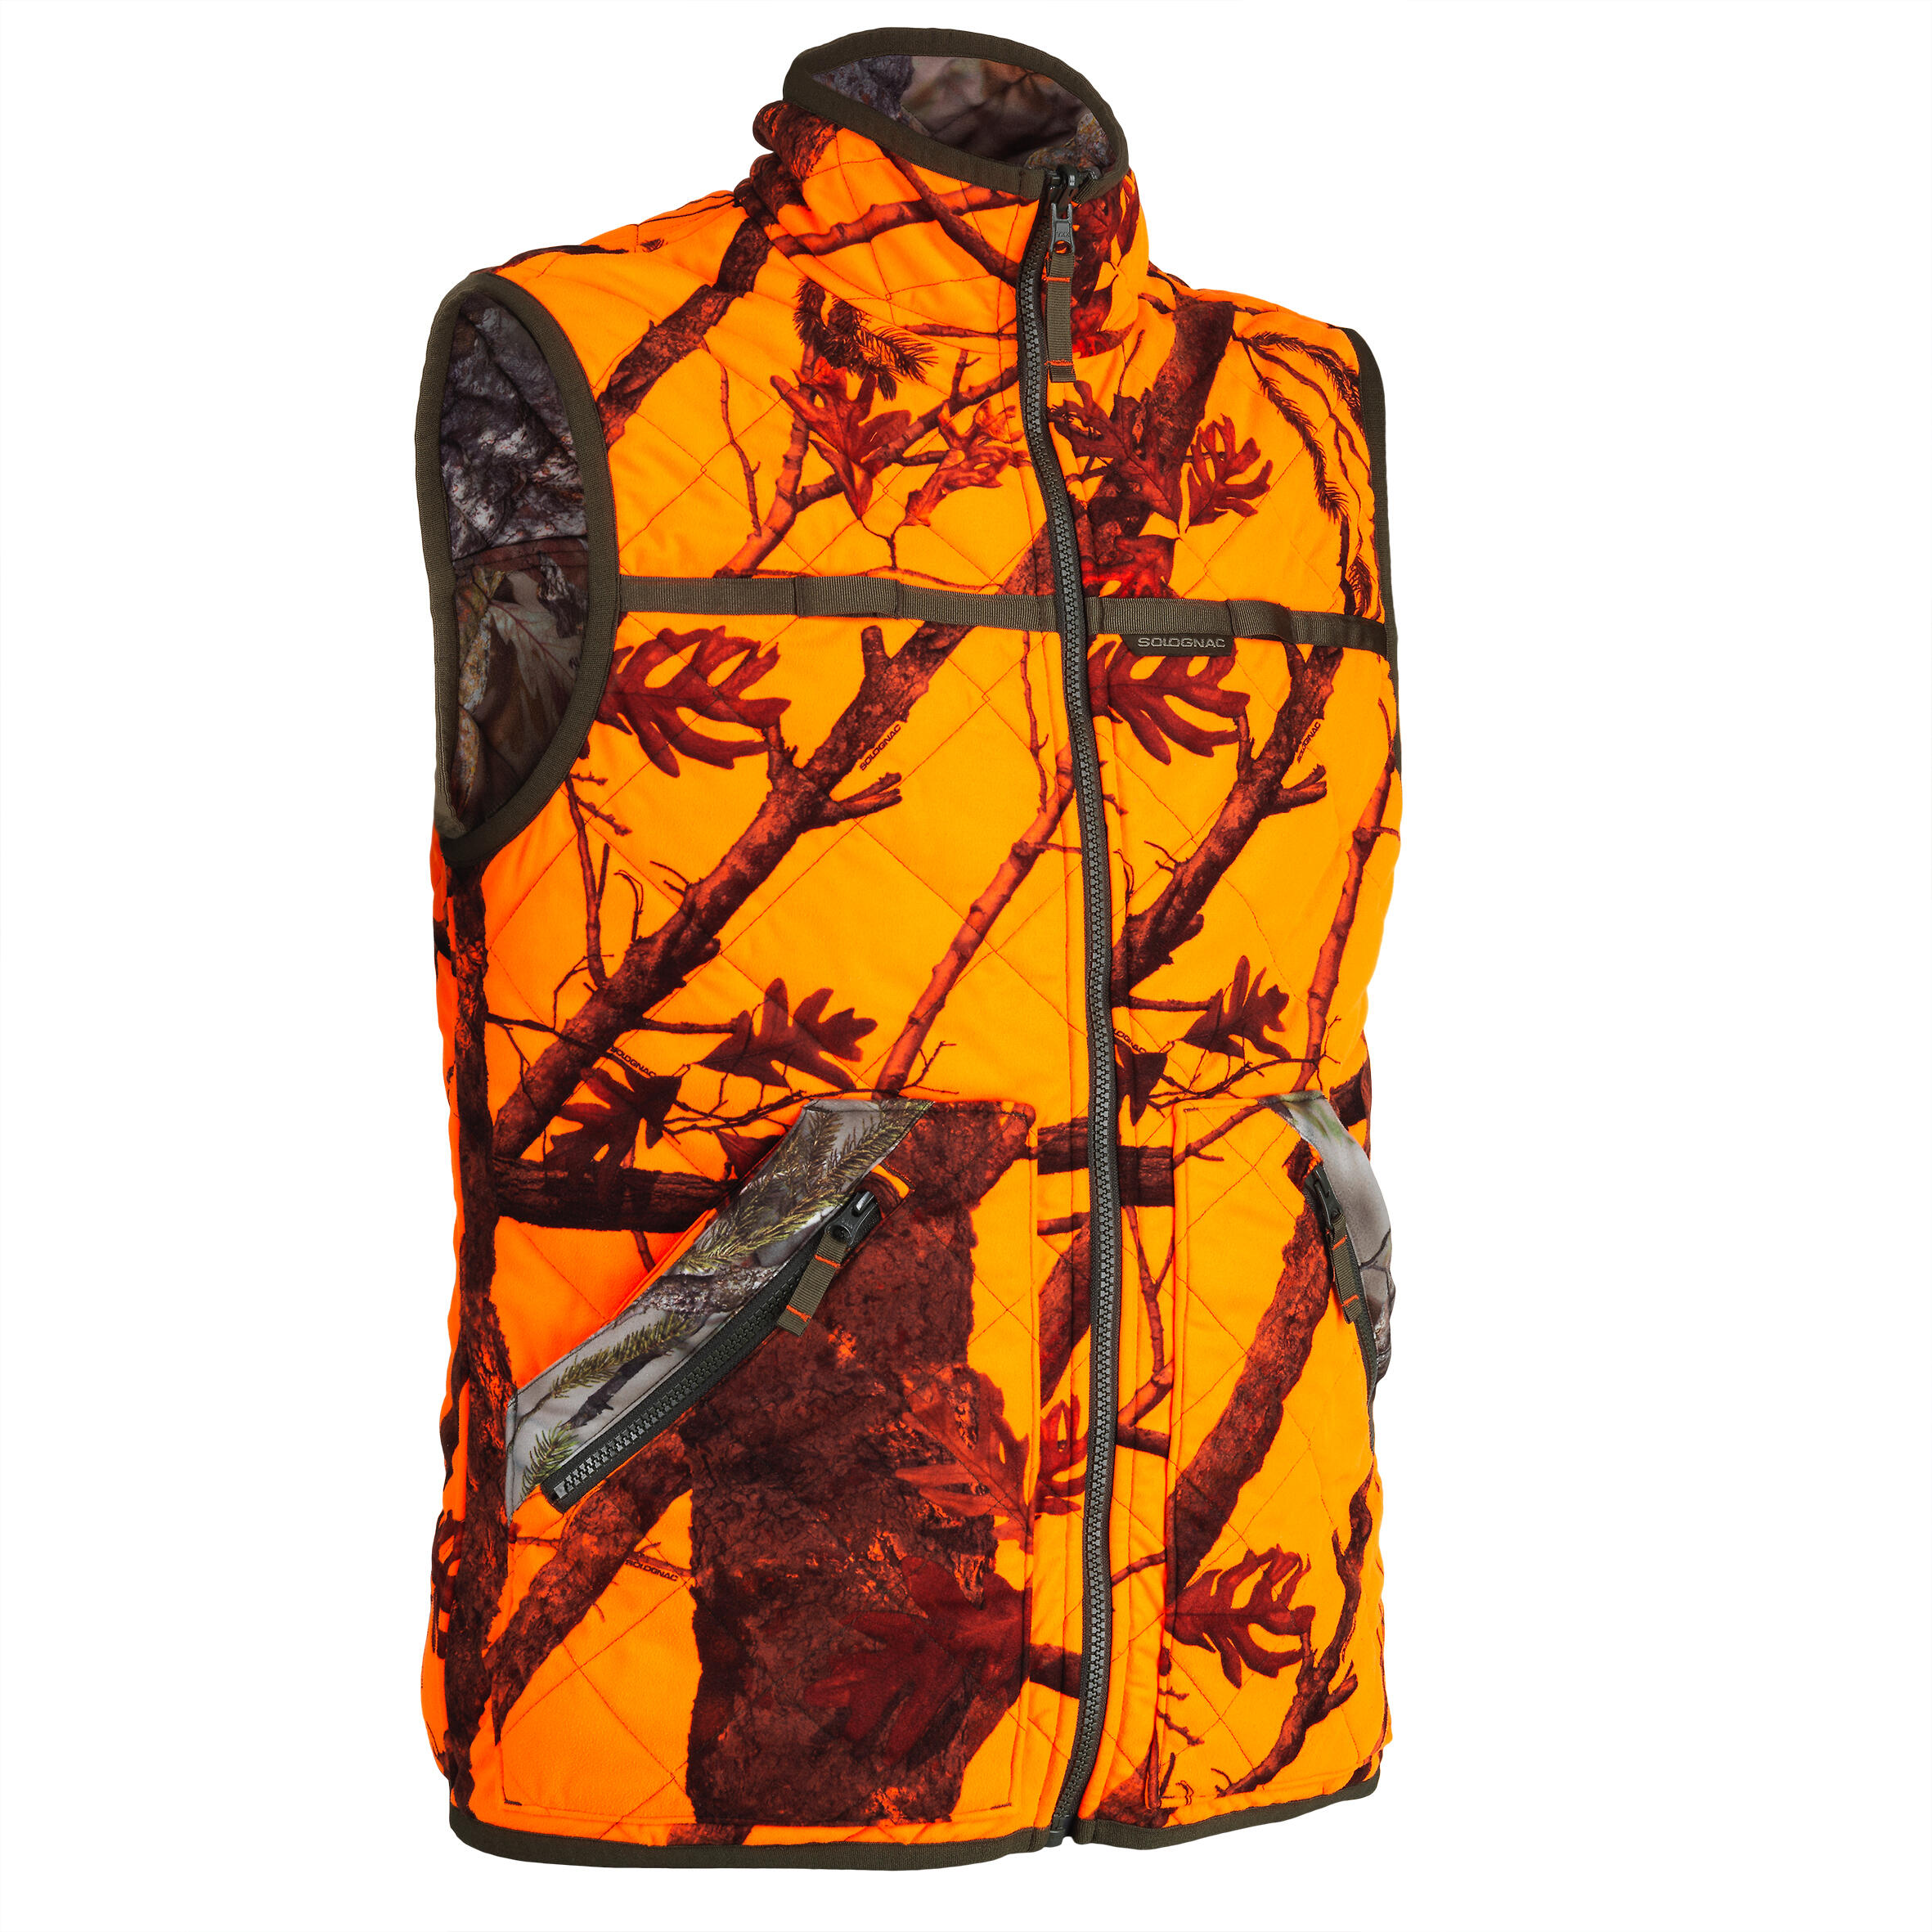 gilet chasse réversible camouflage/camouflage fluo 100 - solognac